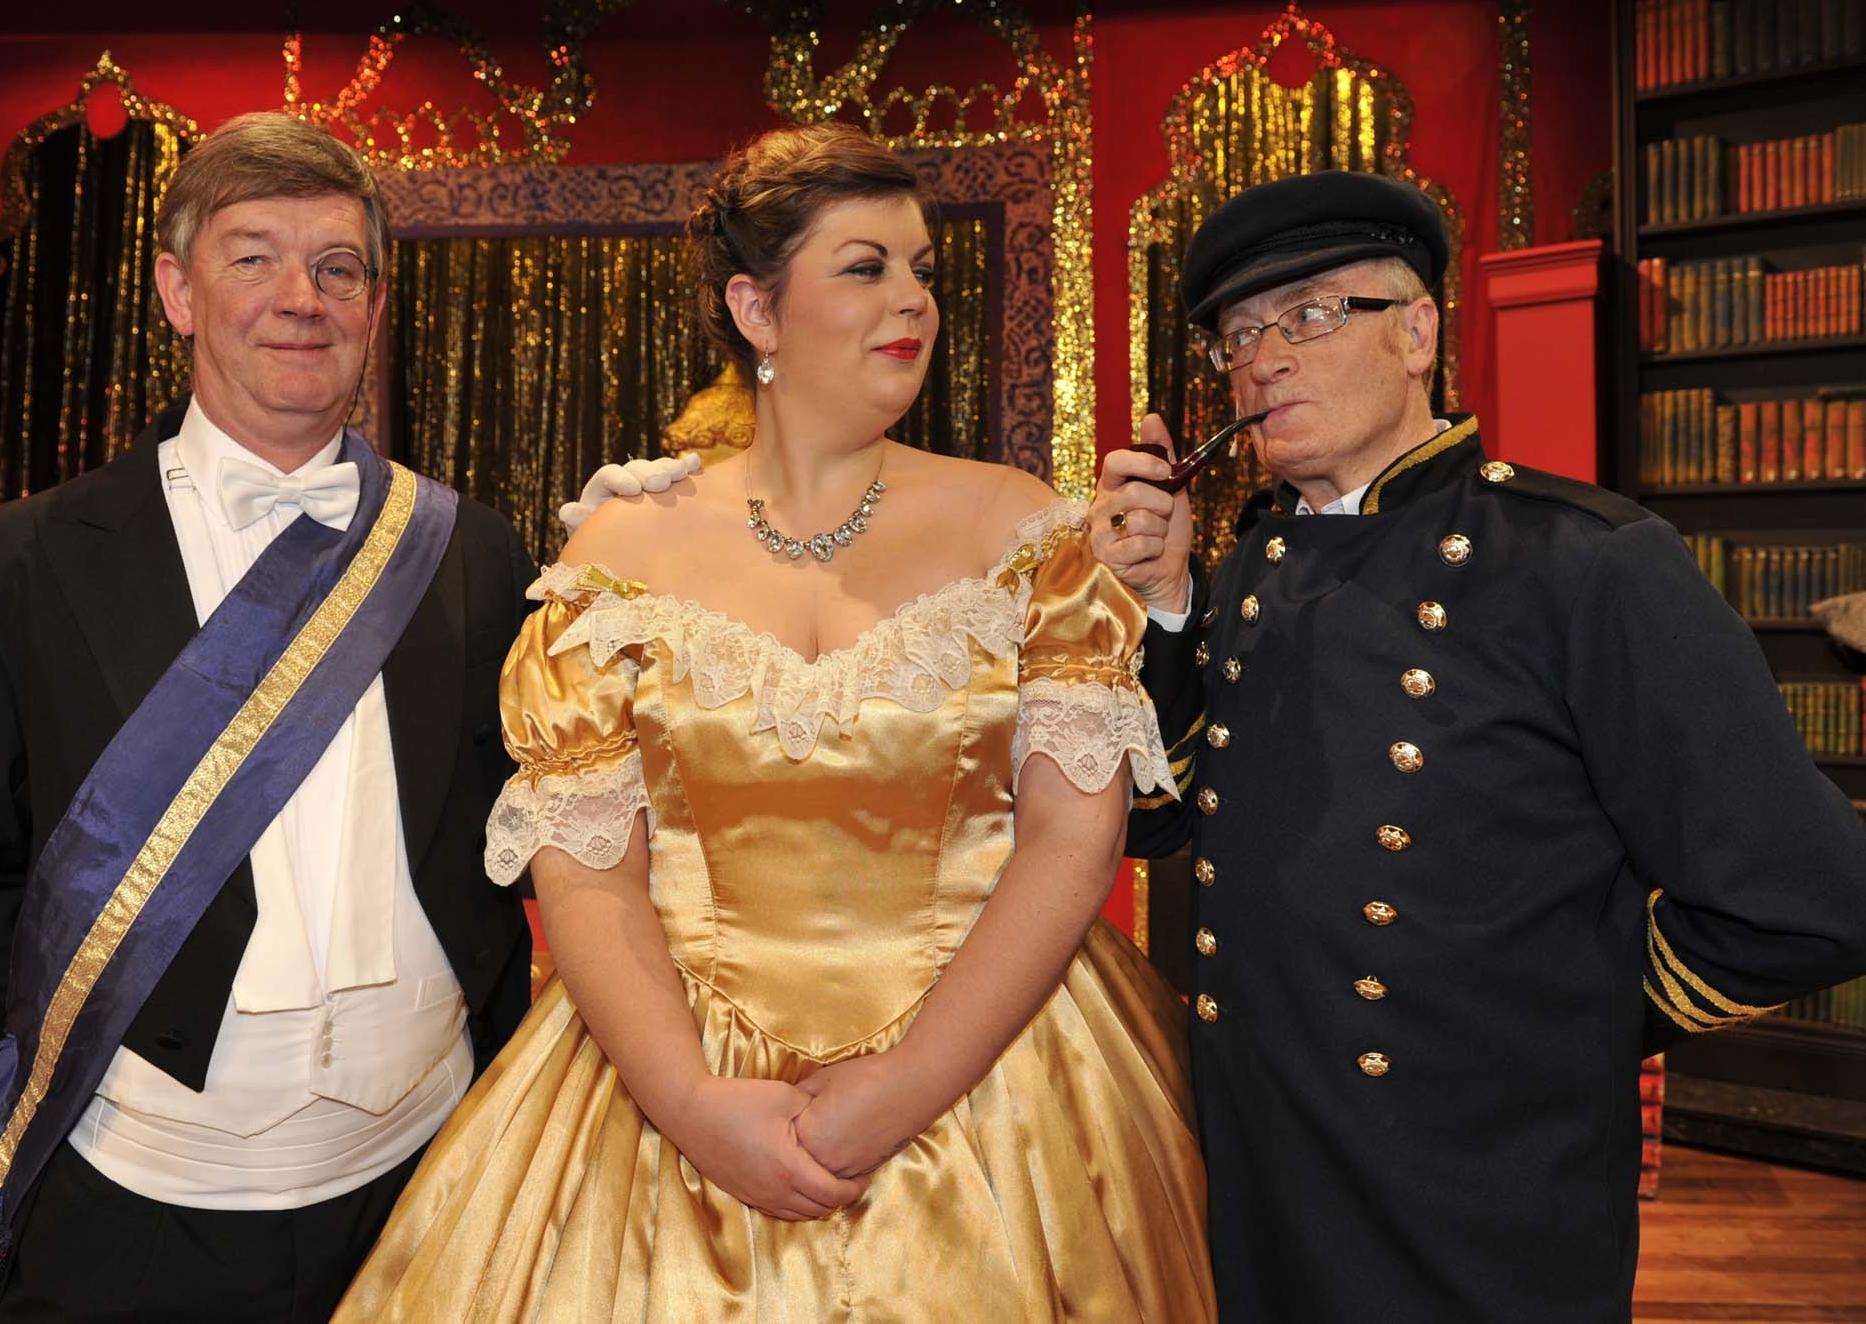 Selkirk Amateur Operatic Society presents 'The King and I' at The Victoria Hall. L-r, Sir Edward Ramsay (David Mitchell) Anna Leonowens (Nicole Robertson) and Captain Orton (Ian Wilson).